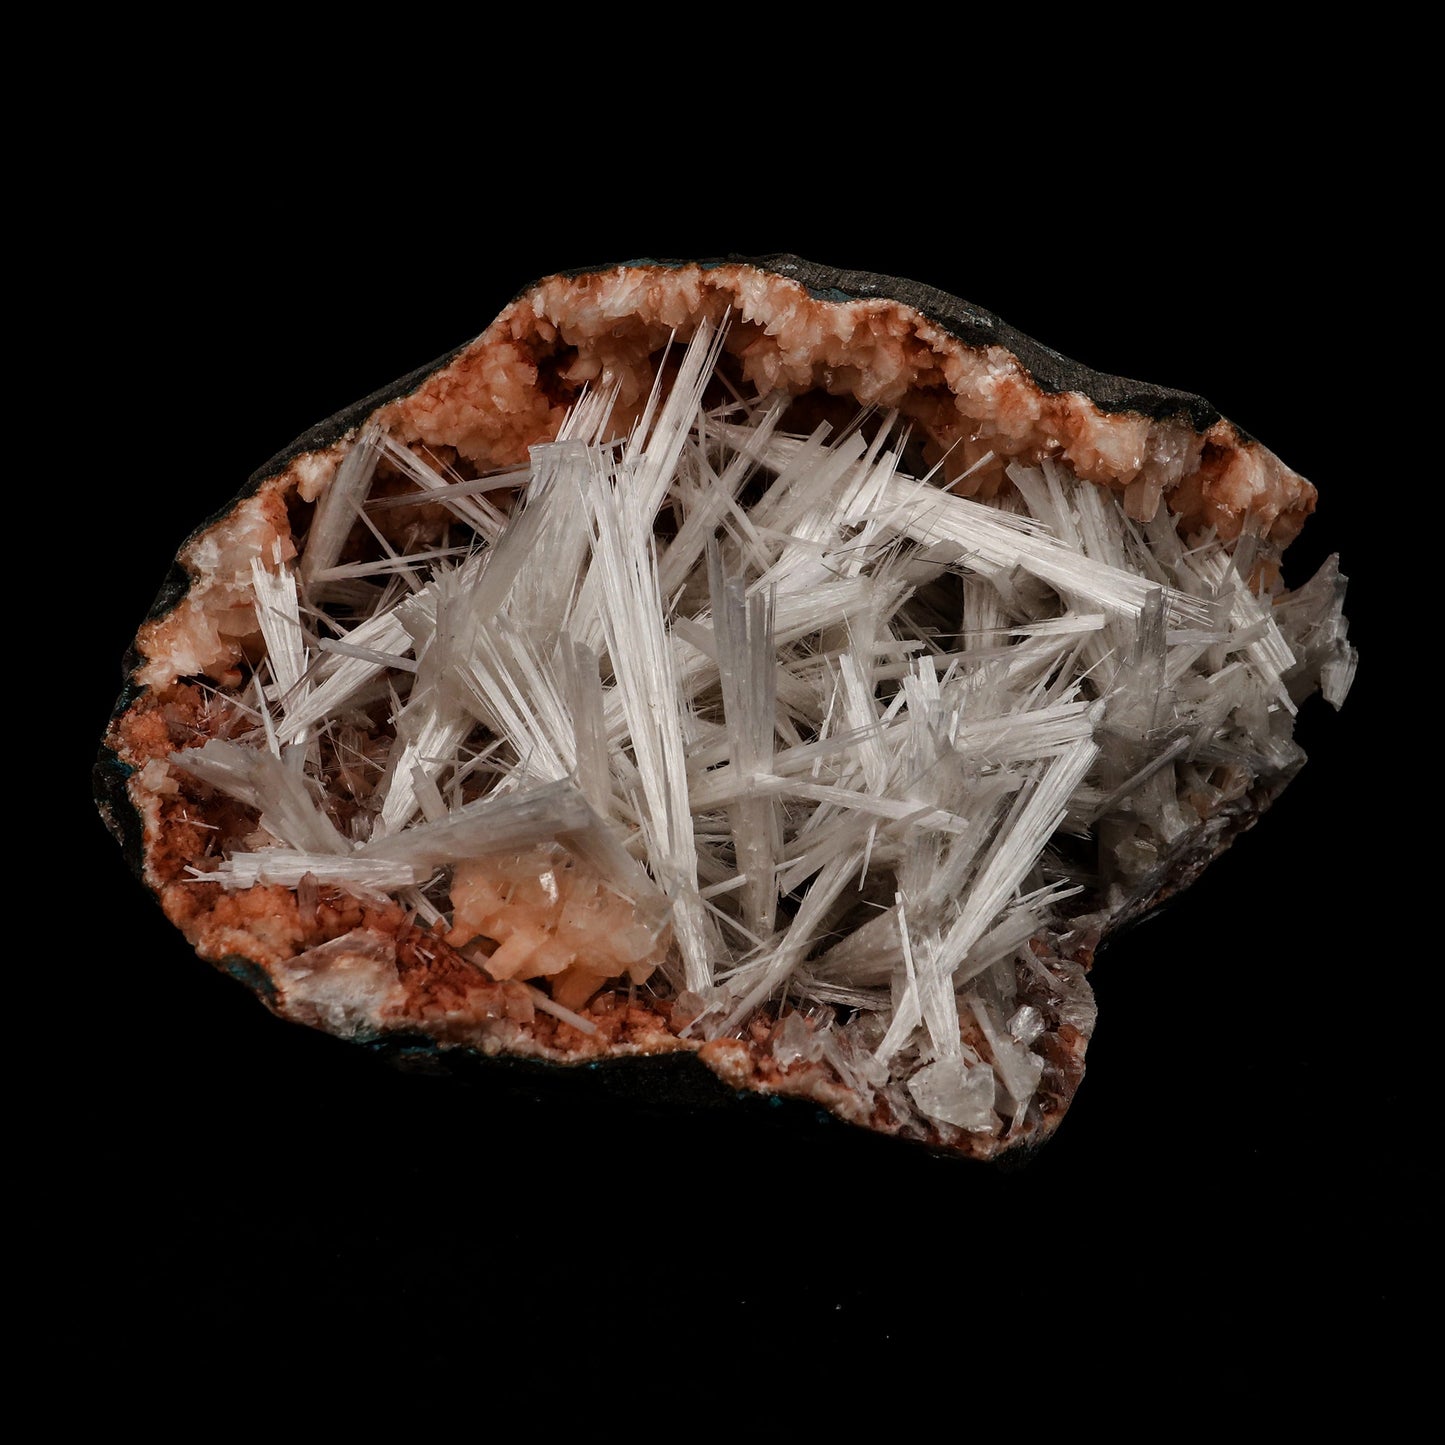 Scolecite Sprays Inside Heulandite Geode Natural Mineral Specimen # B…  https://www.superbminerals.us/products/scolecite-sprays-inside-heulandite-geode-natural-mineral-specimen-b-5304  Features: A geode with beige Heulandite crystals and a radial spray of glossy, colourless, ultra-transparent, needle-like Scolecite crystals, as well as numerous solitary crystals of Scolecite. It is nothing short of breathtaking - the crystal structure, luster, contrast, and symmetry are all perfect.